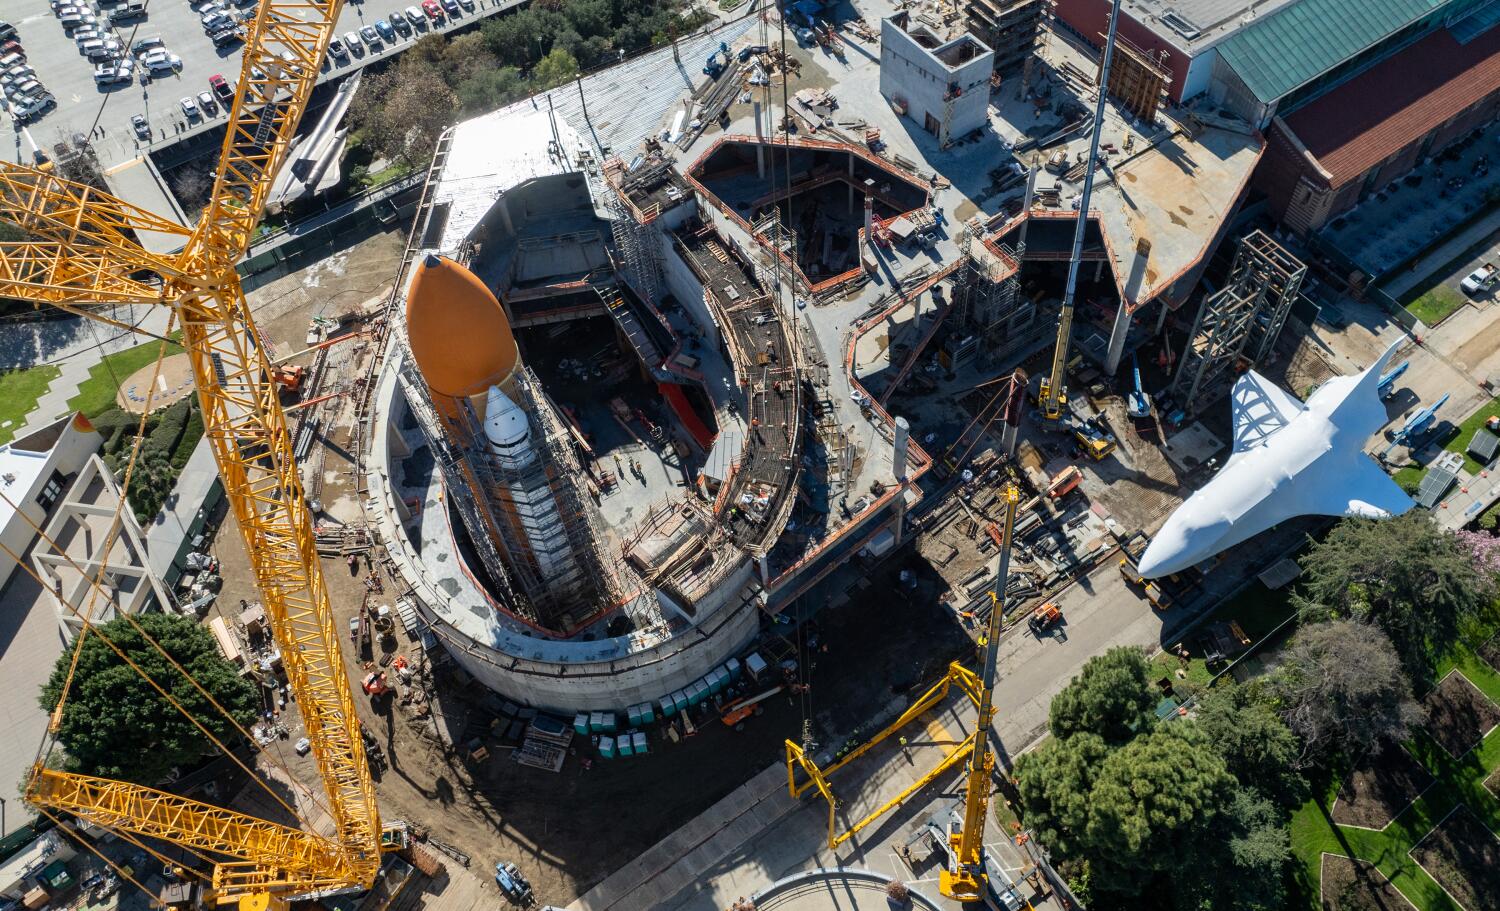 Space shuttle Endeavour soaring into place at final museum home